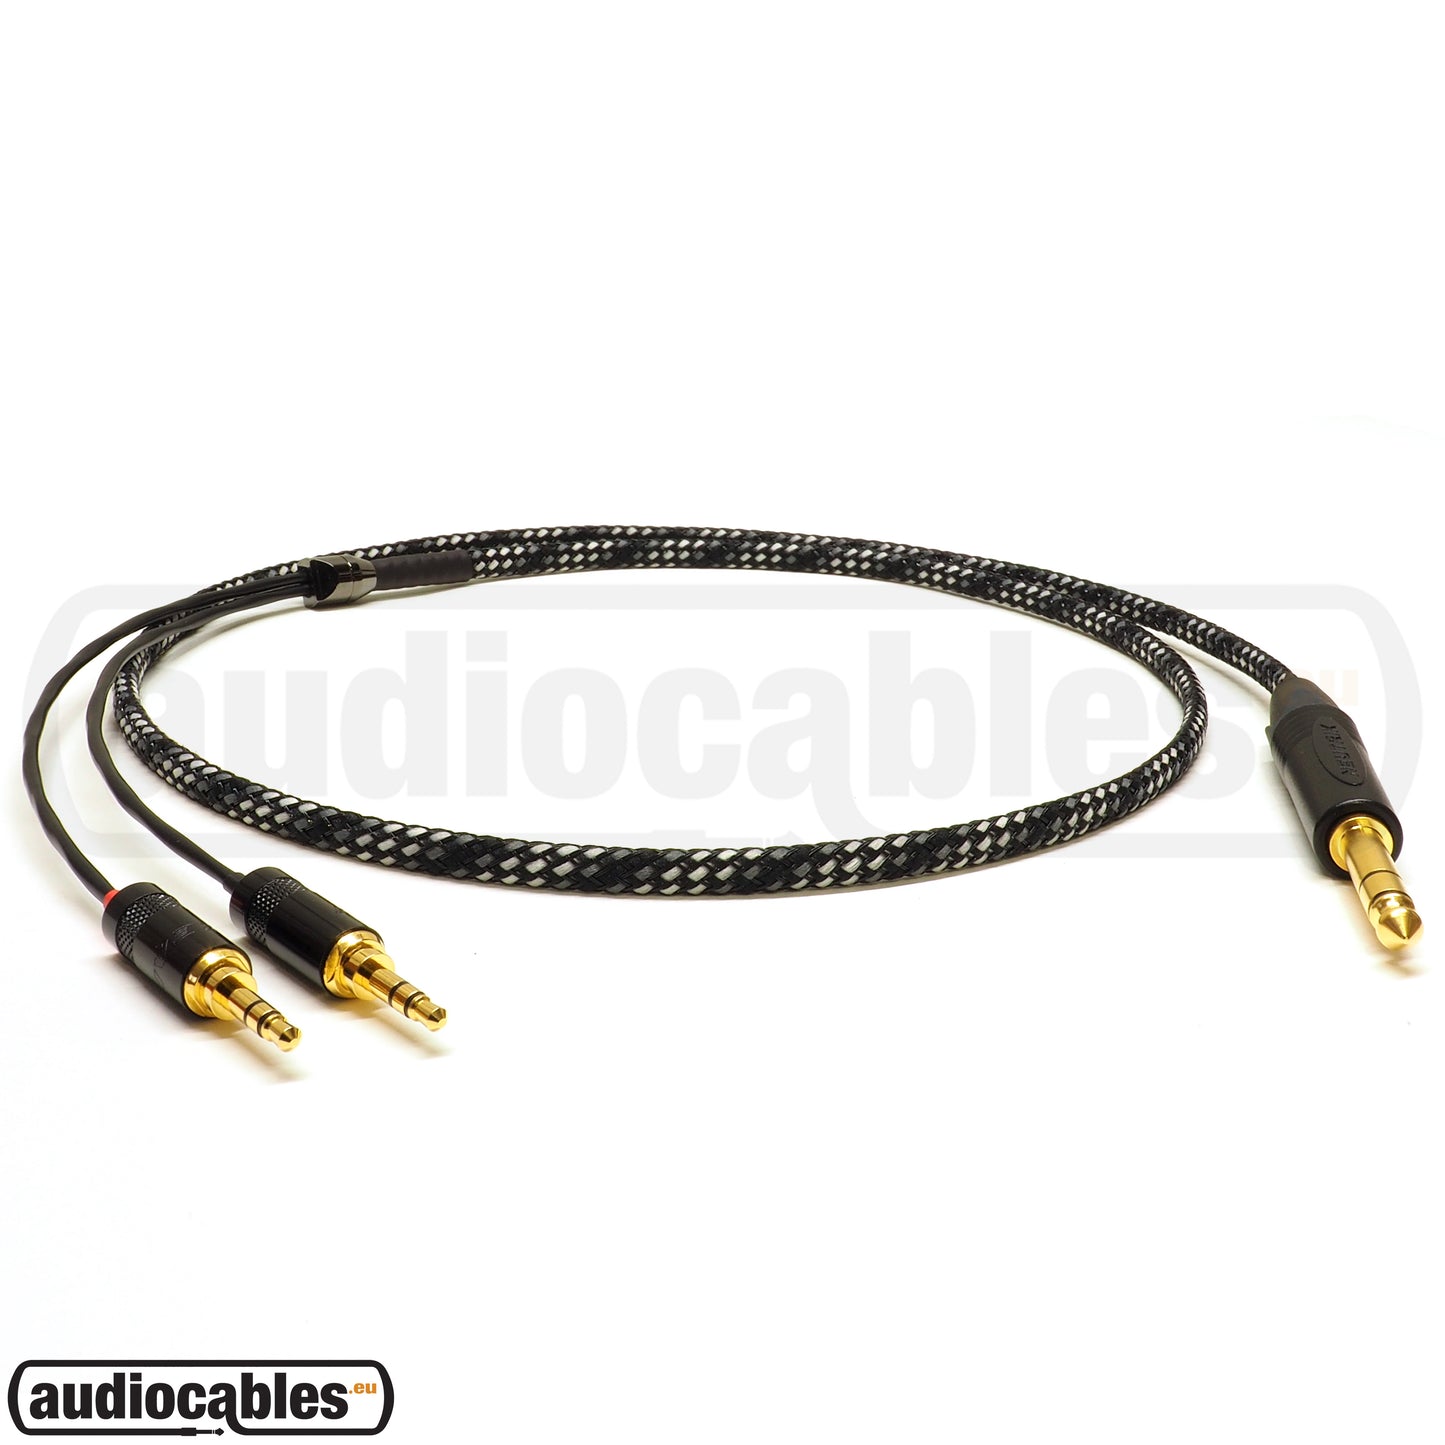 Mogami Cable for Hifiman Headphones (Braided, Dual 3.5mm)